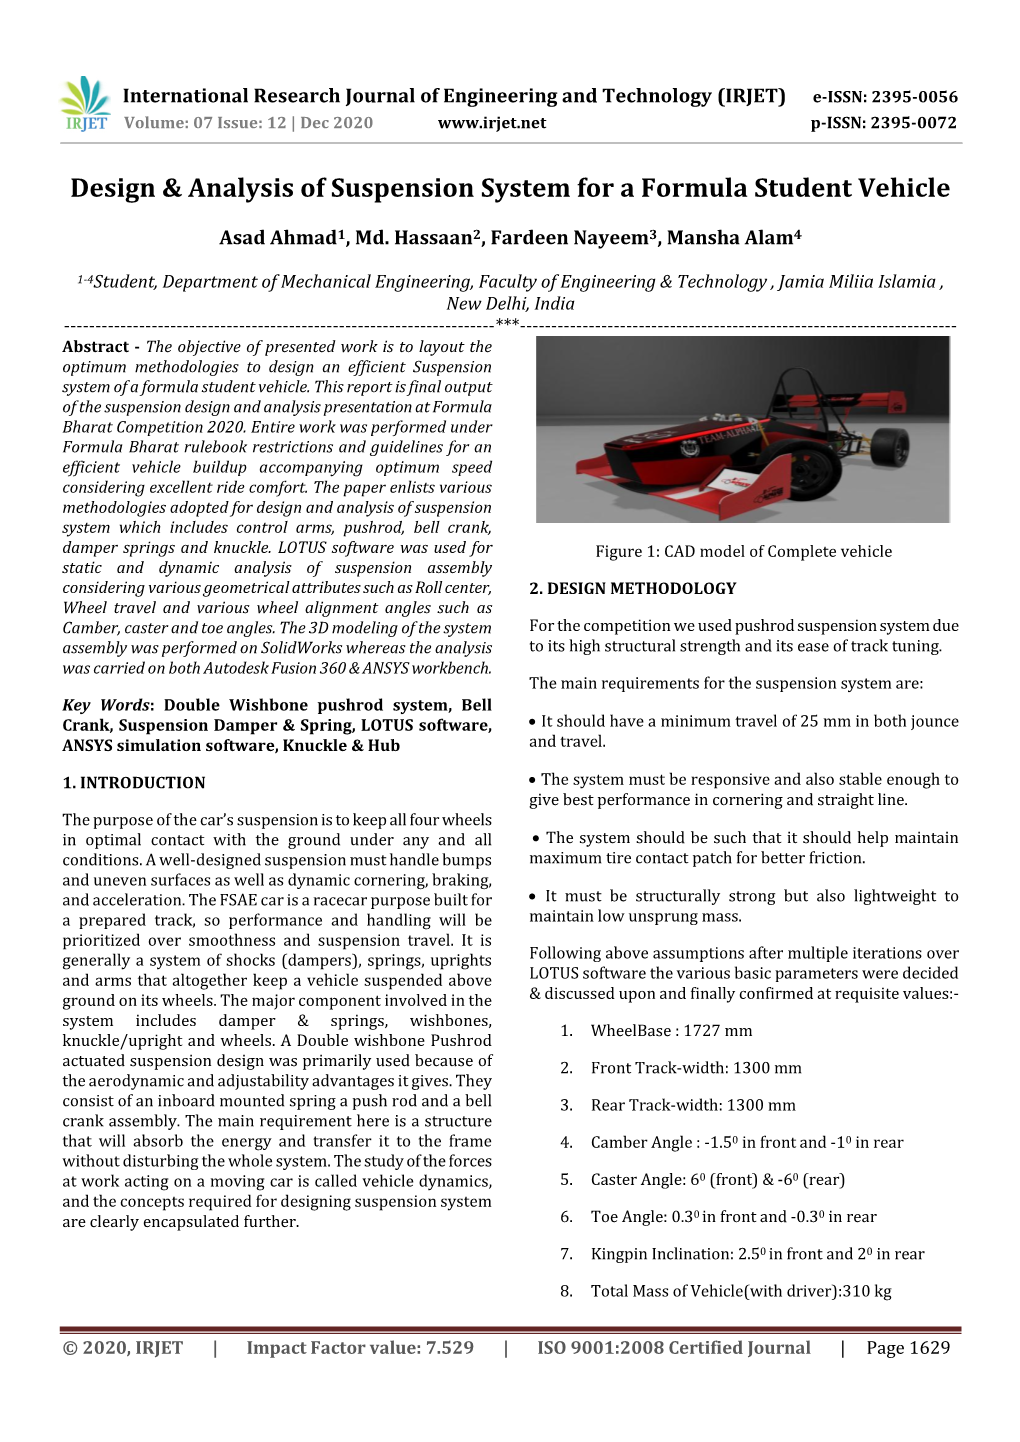 Design & Analysis of Suspension System for a Formula Student Vehicle